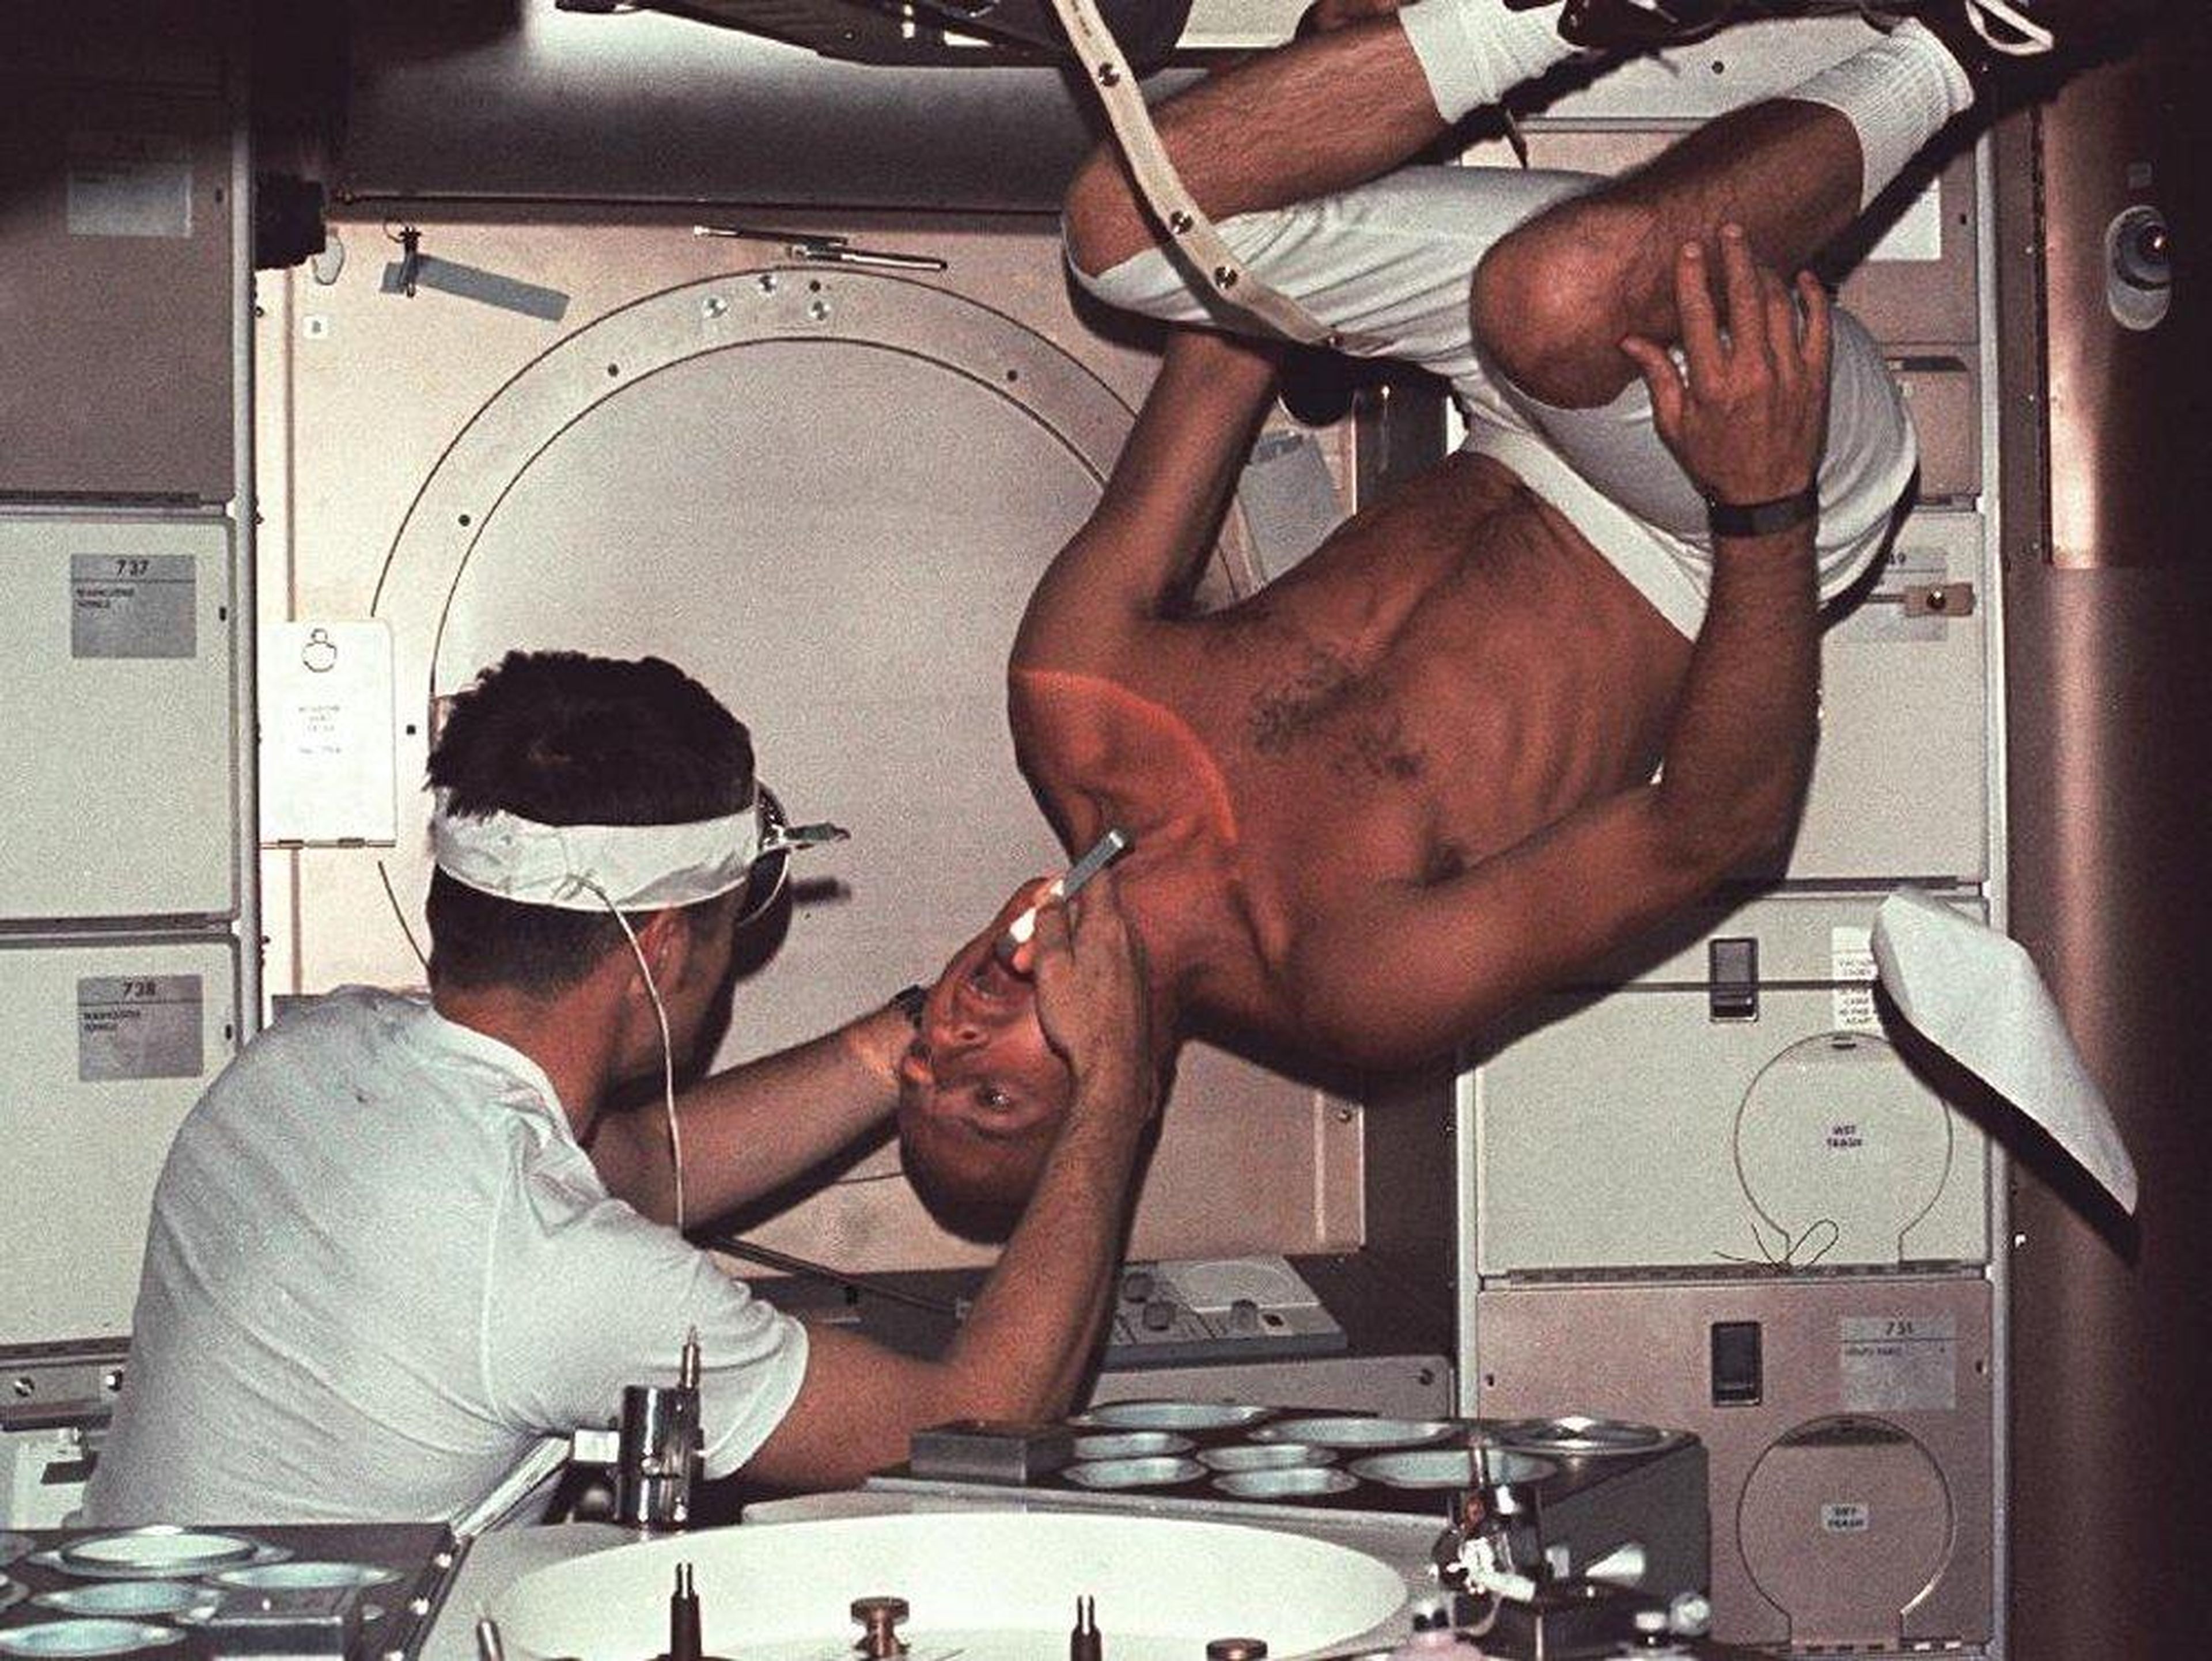 Joseph Kerwin, Skylab's pilot and doctor, conducted physical exams for astronauts onboard in order to collect data on the physical toll of human spaceflight.